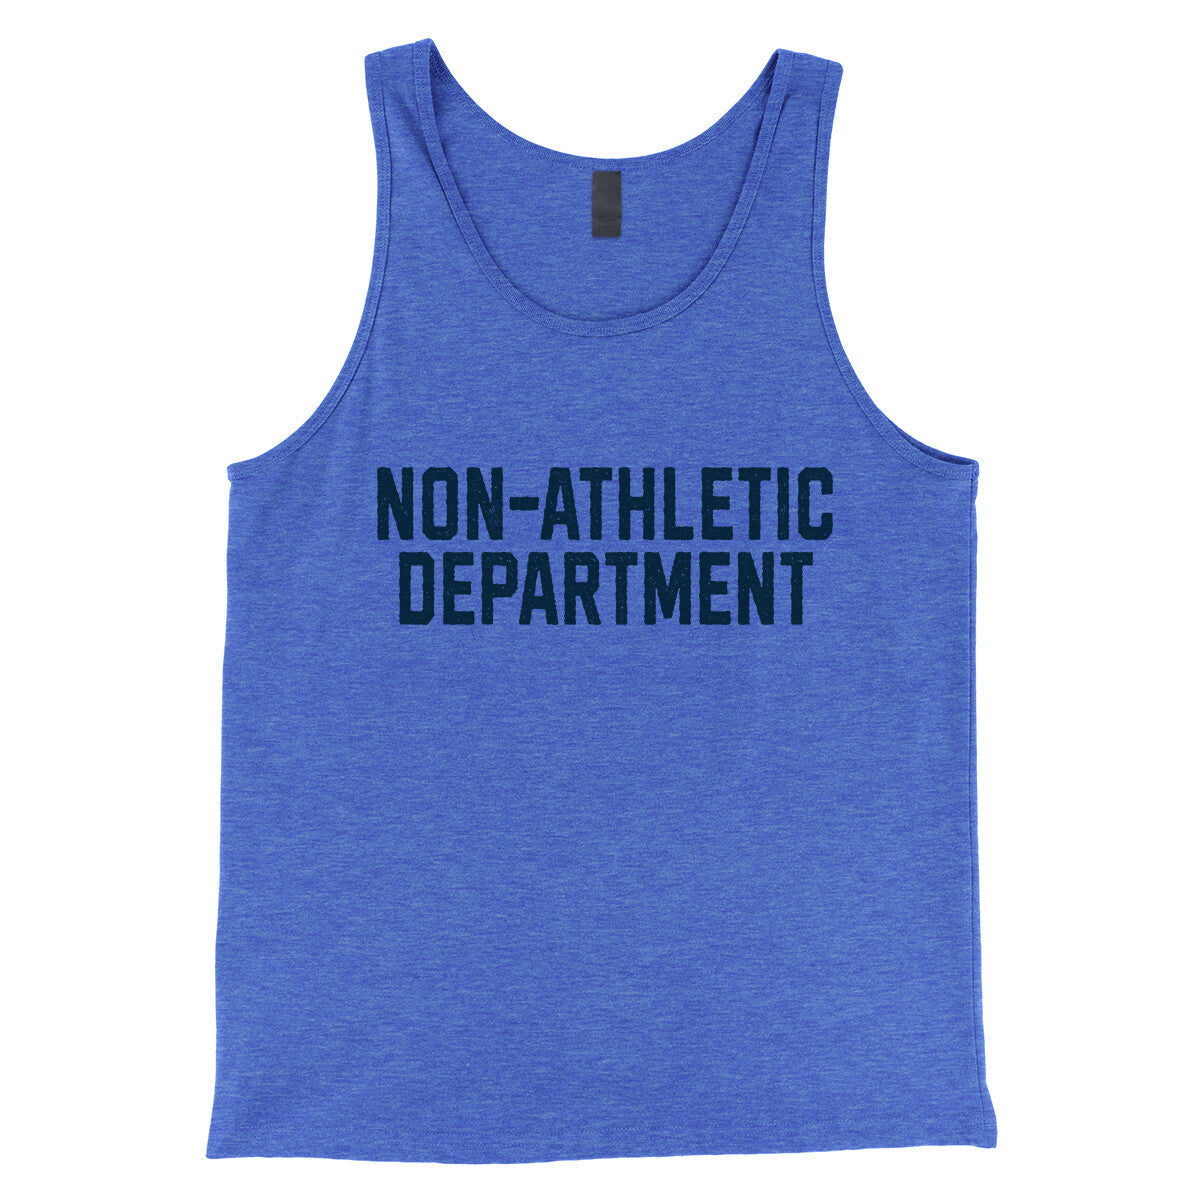 Non-Athletic Department in True Royal TriBlend Color